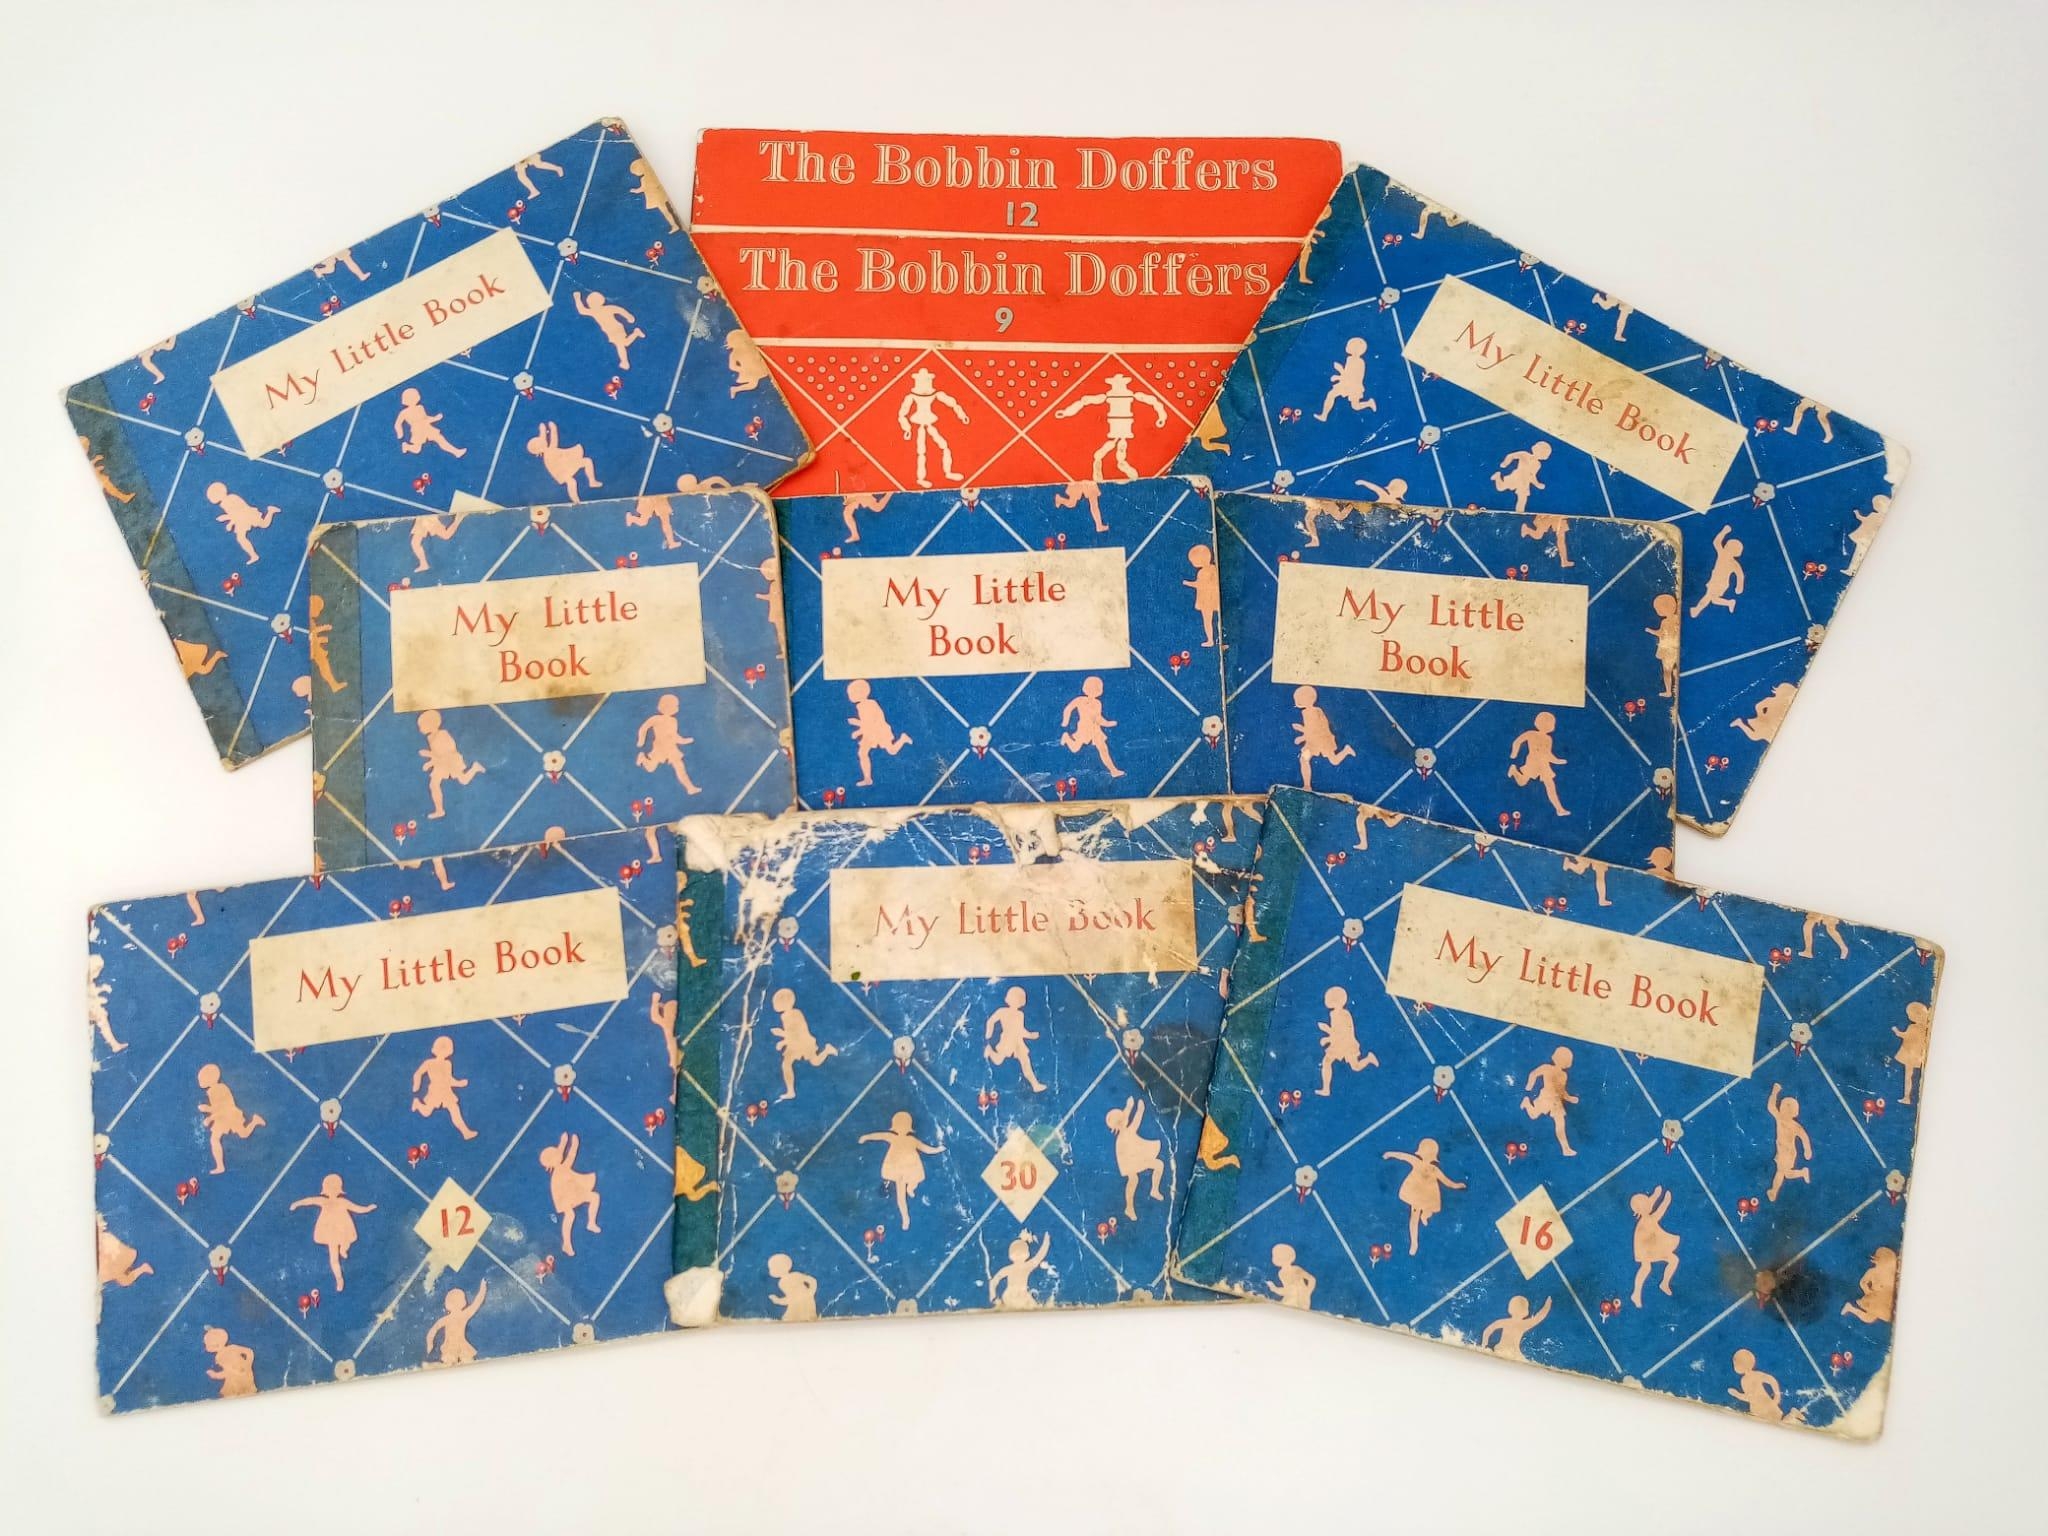 Eight Vintage Copies of My Little Book - Containing 'The Janet and John Stories' and Two copies of